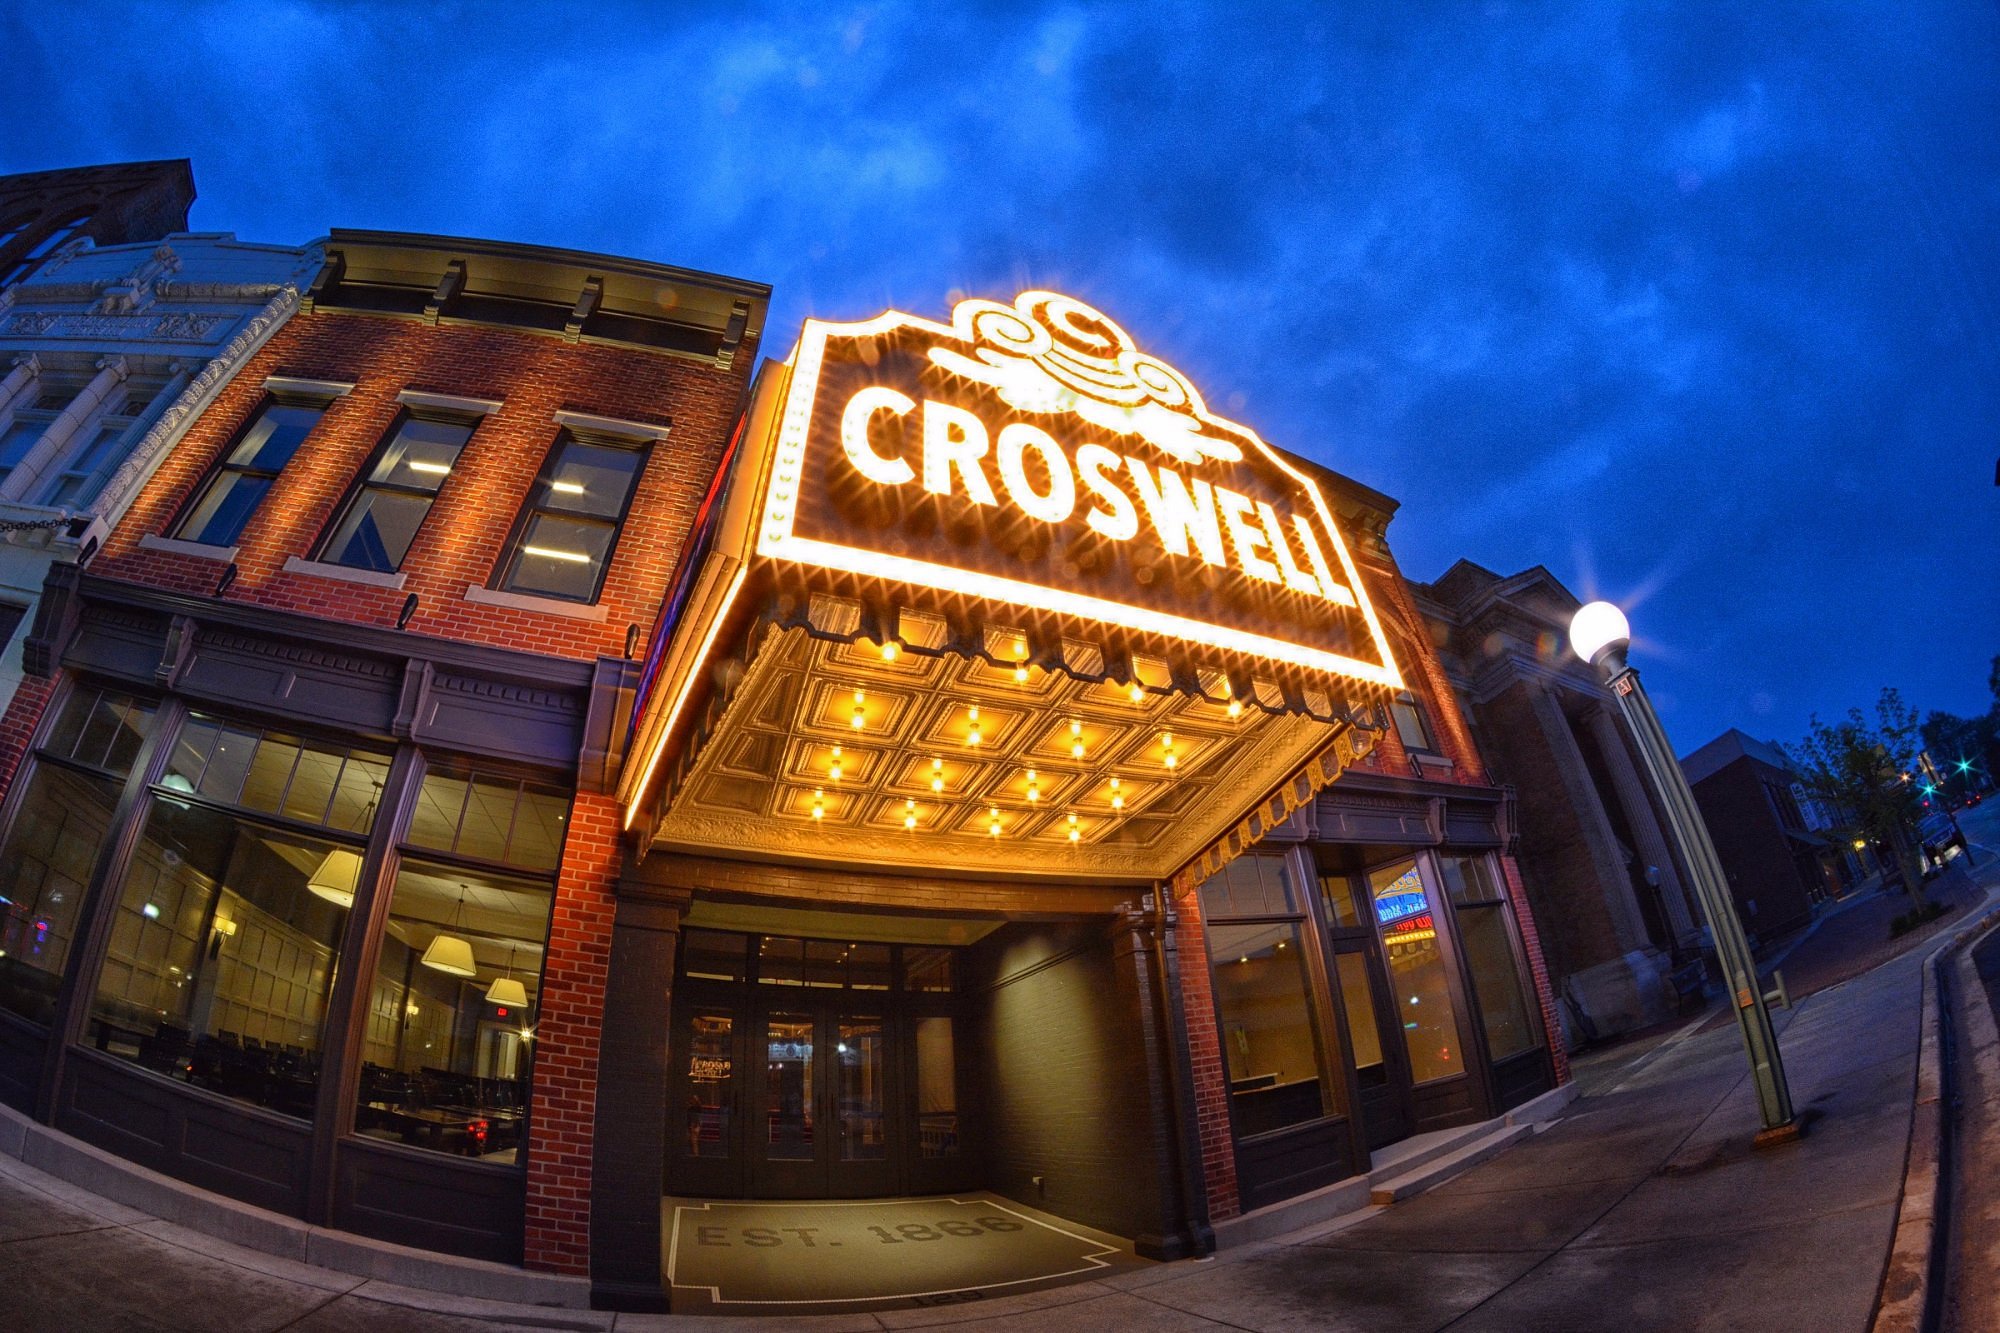 Photo Provided by Croswell Opera House